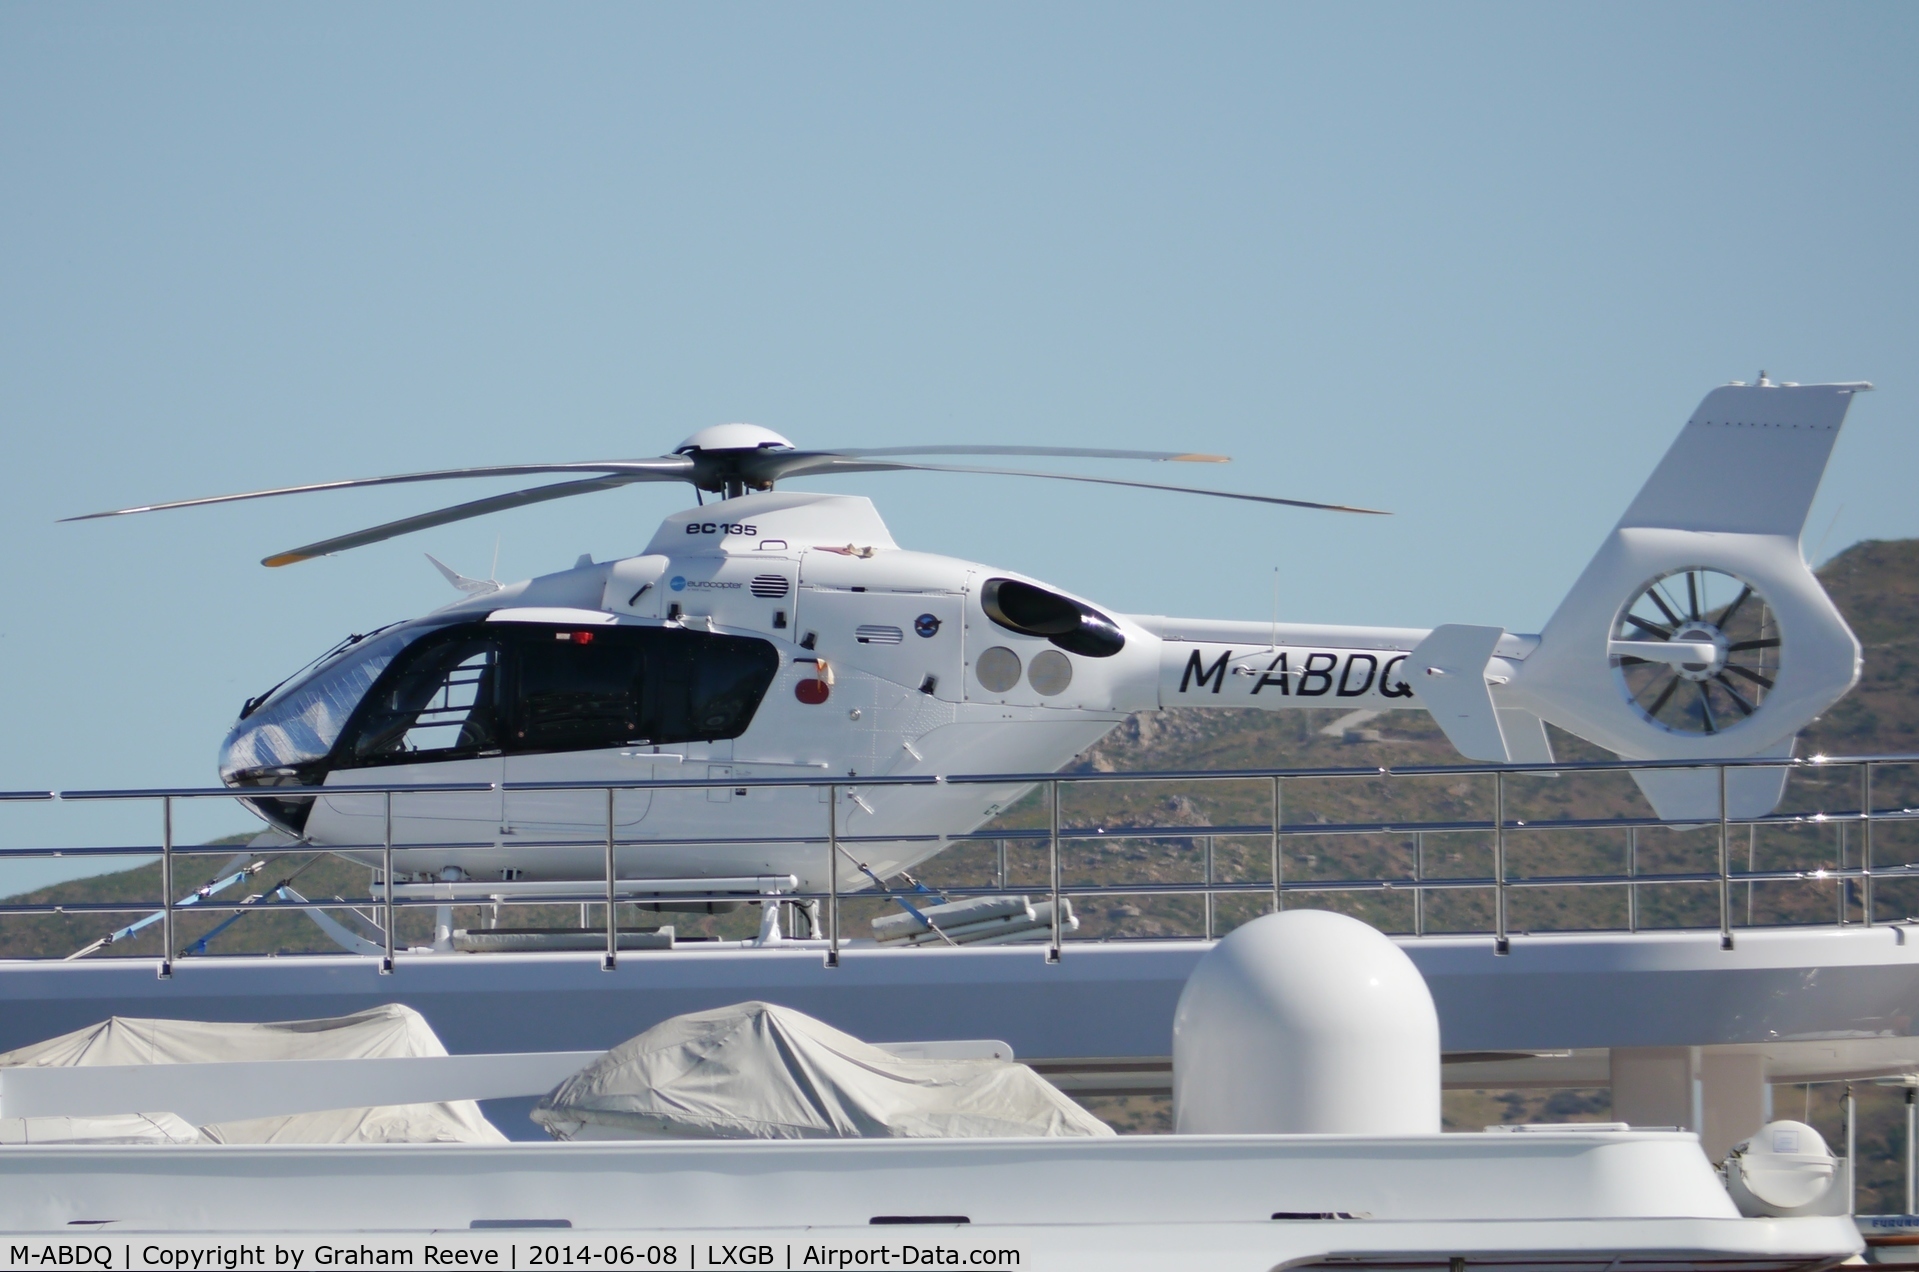 M-ABDQ, Eurocopter EC-135P-2 C/N 989, On board a motor yacht moored next to Gibraltar airport.